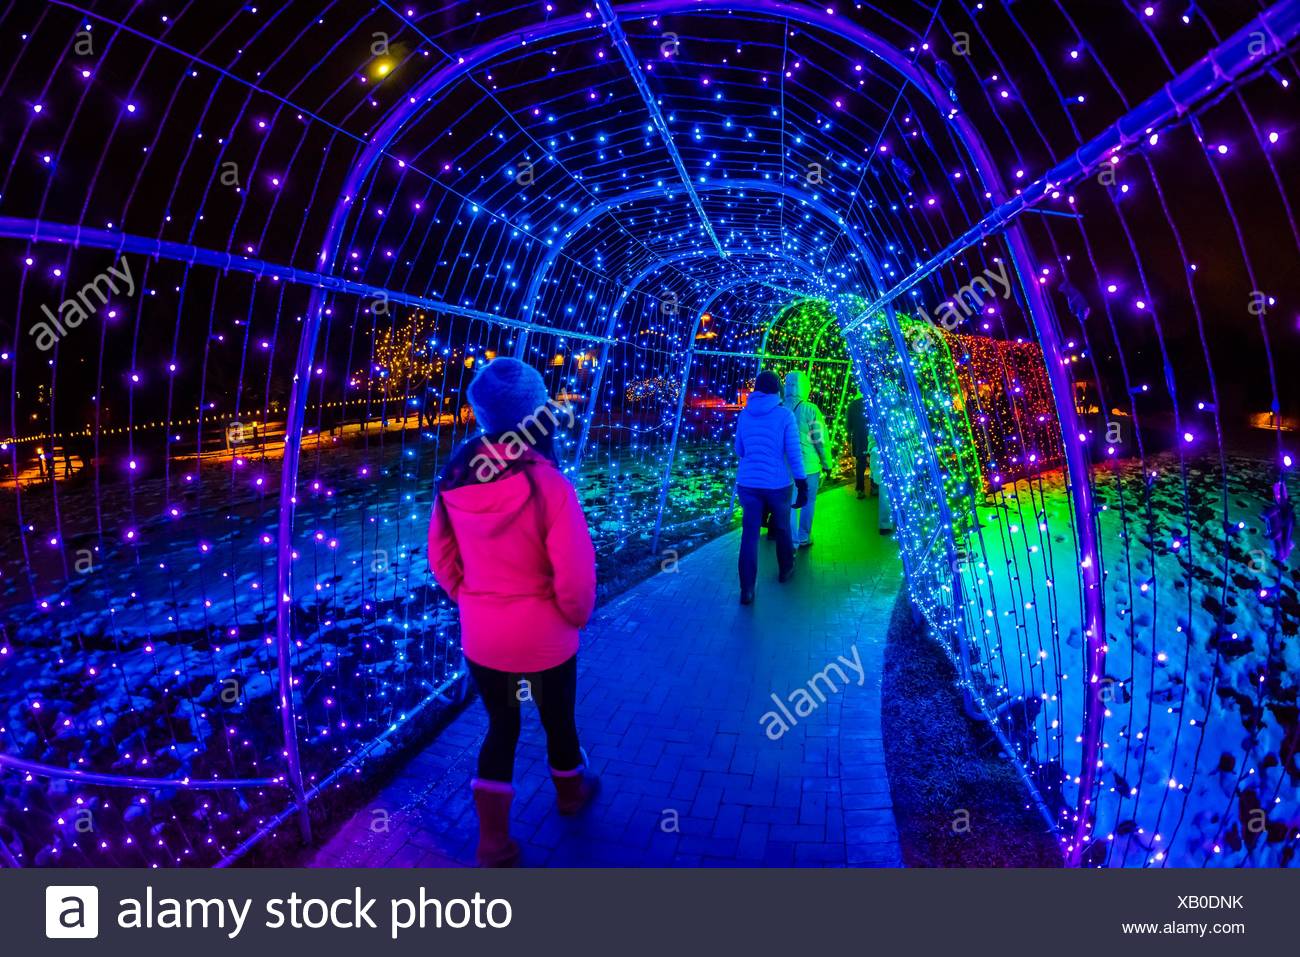 A Tunnel Of Lights A Hudson Christmas Holiday Light Show At